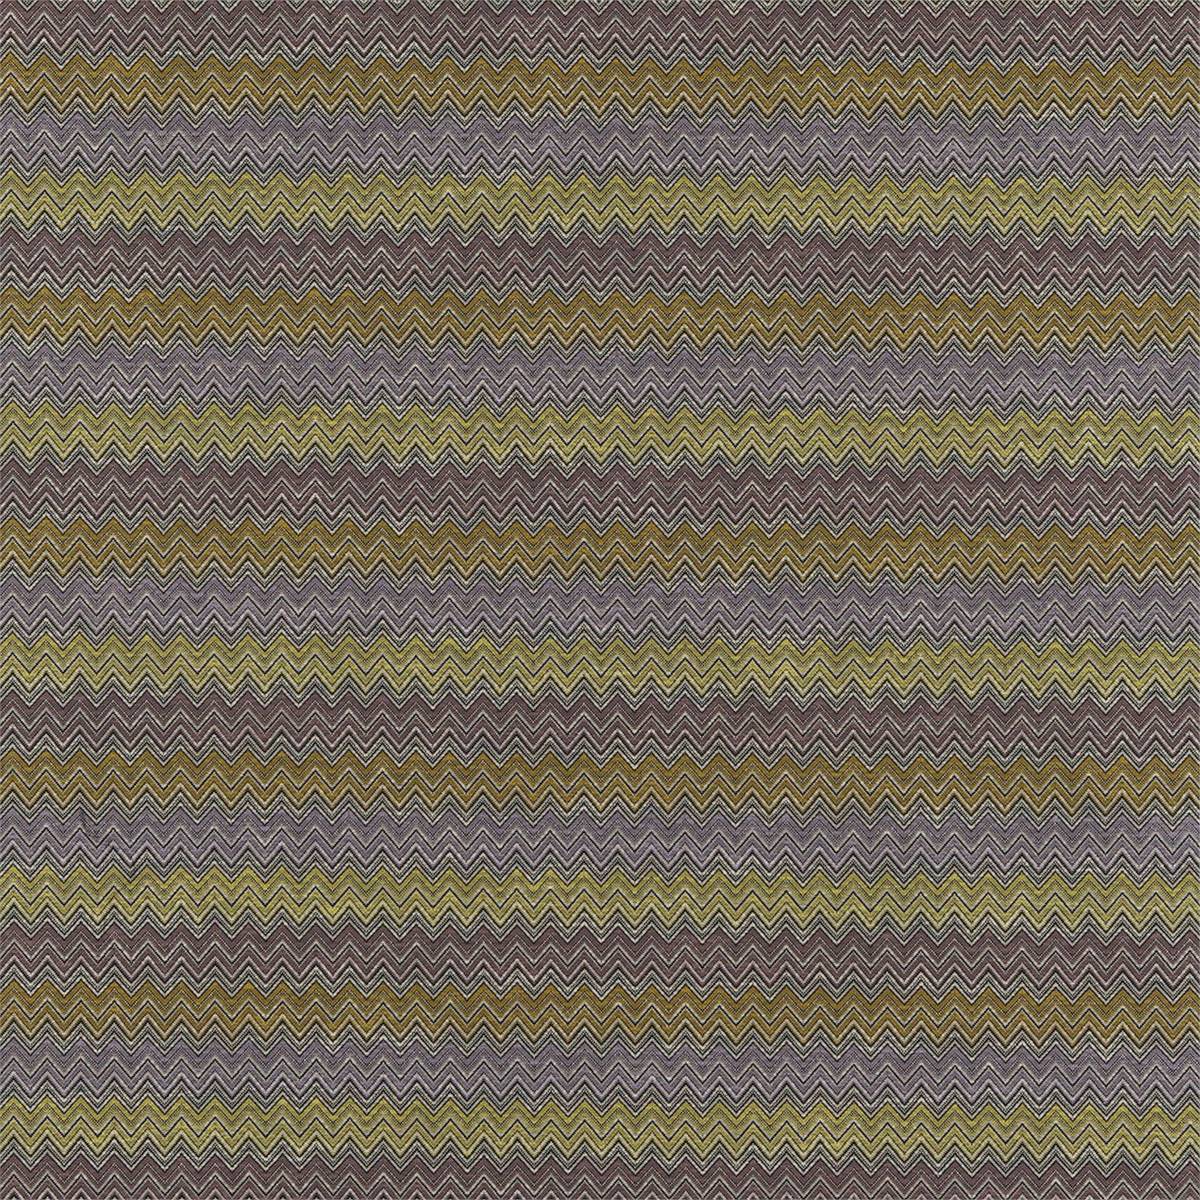 Chevron Lilac Mustard Fig Charcoal Fabric by Harlequin